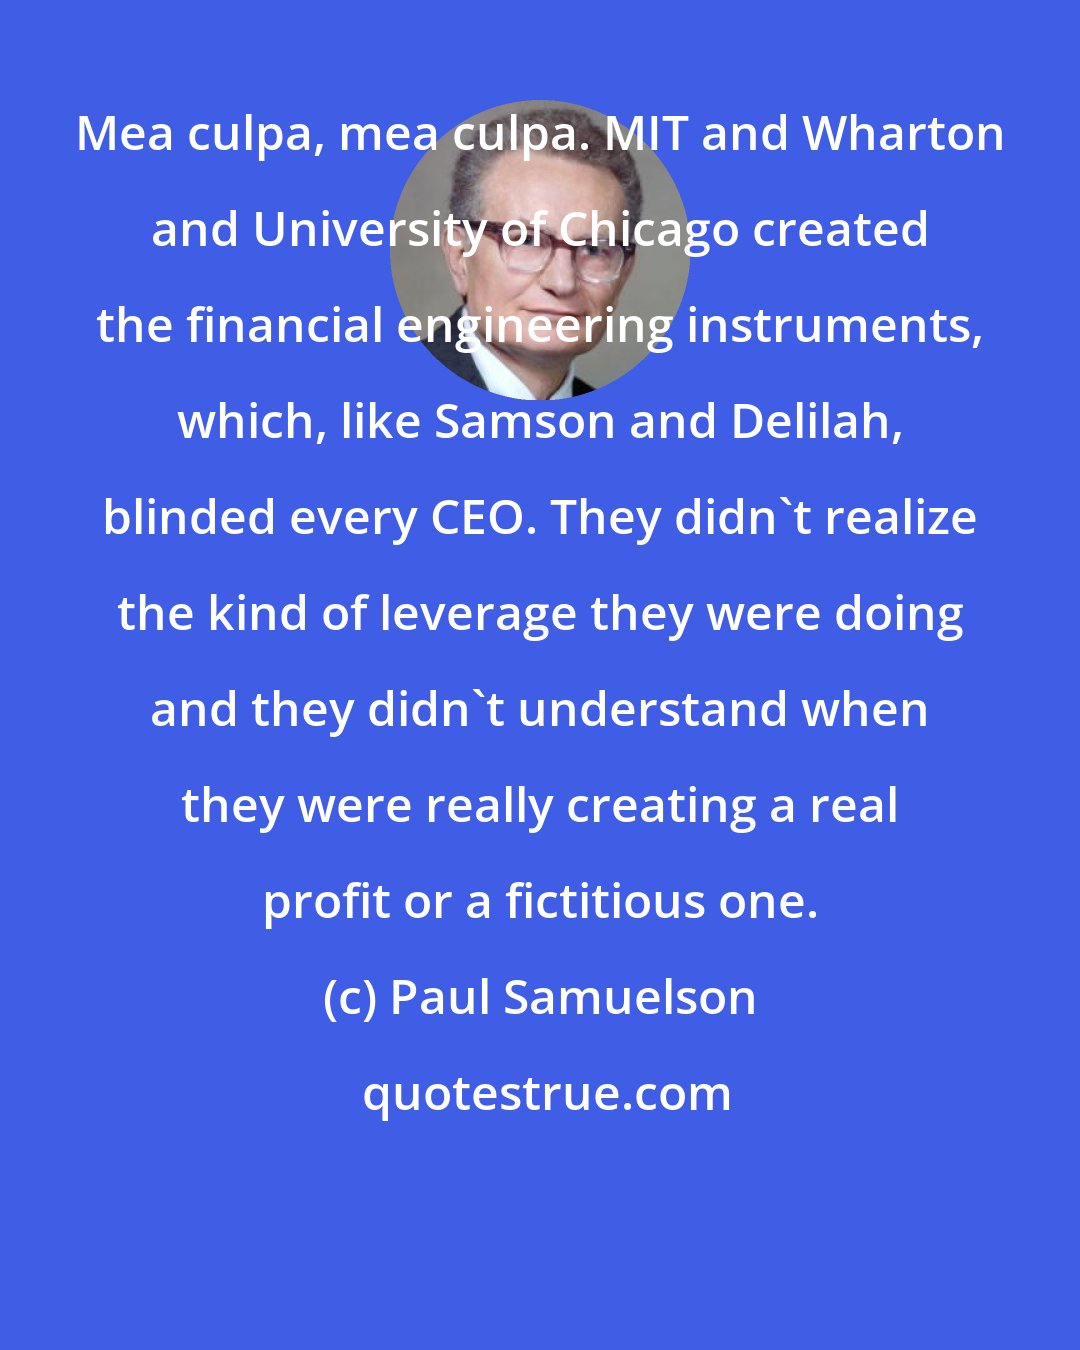 Paul Samuelson: Mea culpa, mea culpa. MIT and Wharton and University of Chicago created the financial engineering instruments, which, like Samson and Delilah, blinded every CEO. They didn't realize the kind of leverage they were doing and they didn't understand when they were really creating a real profit or a fictitious one.